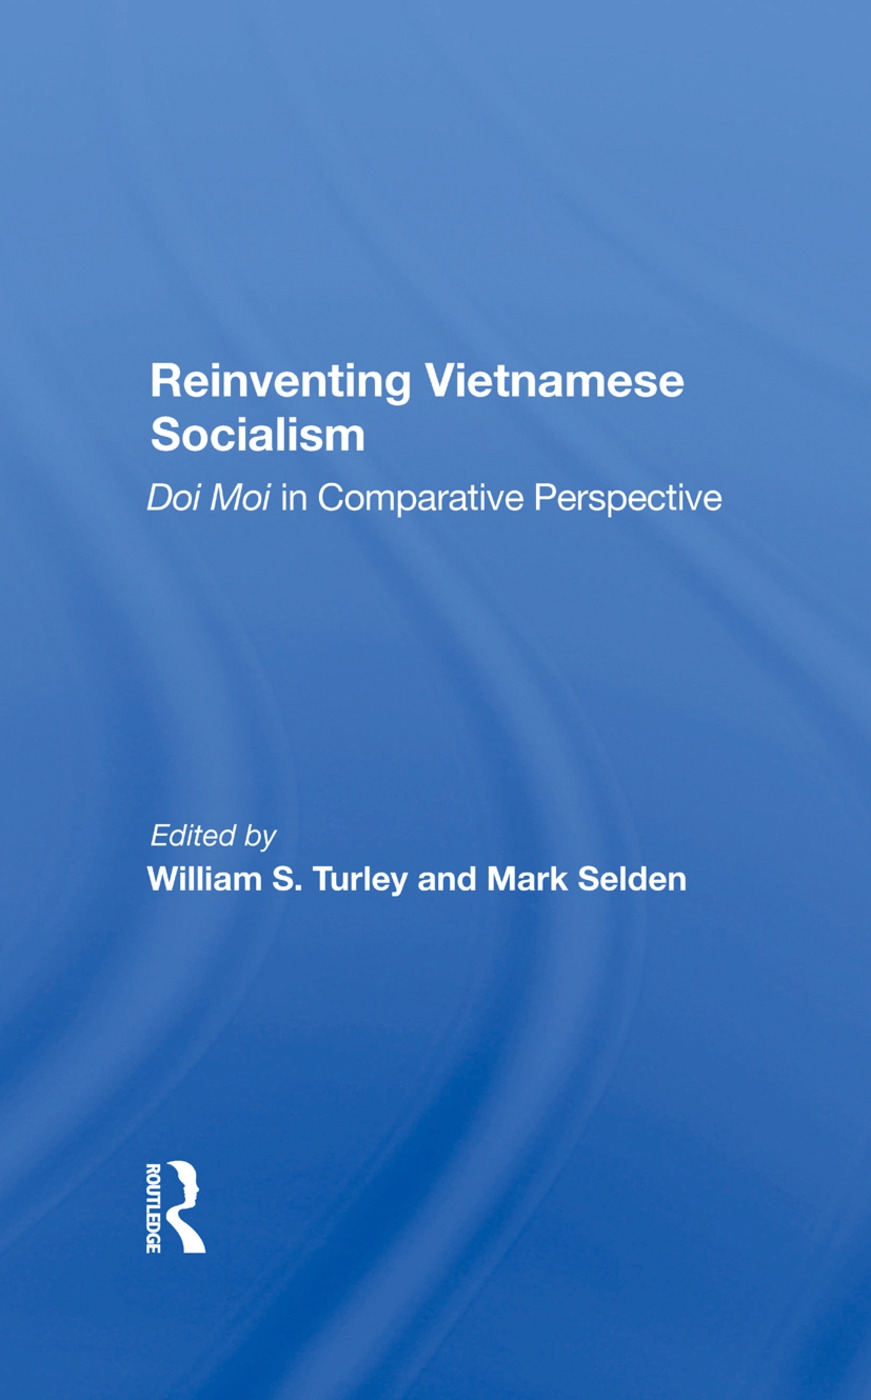 Reinventing Vietnamese Socialism: Doi Moi in Comparative Perspective